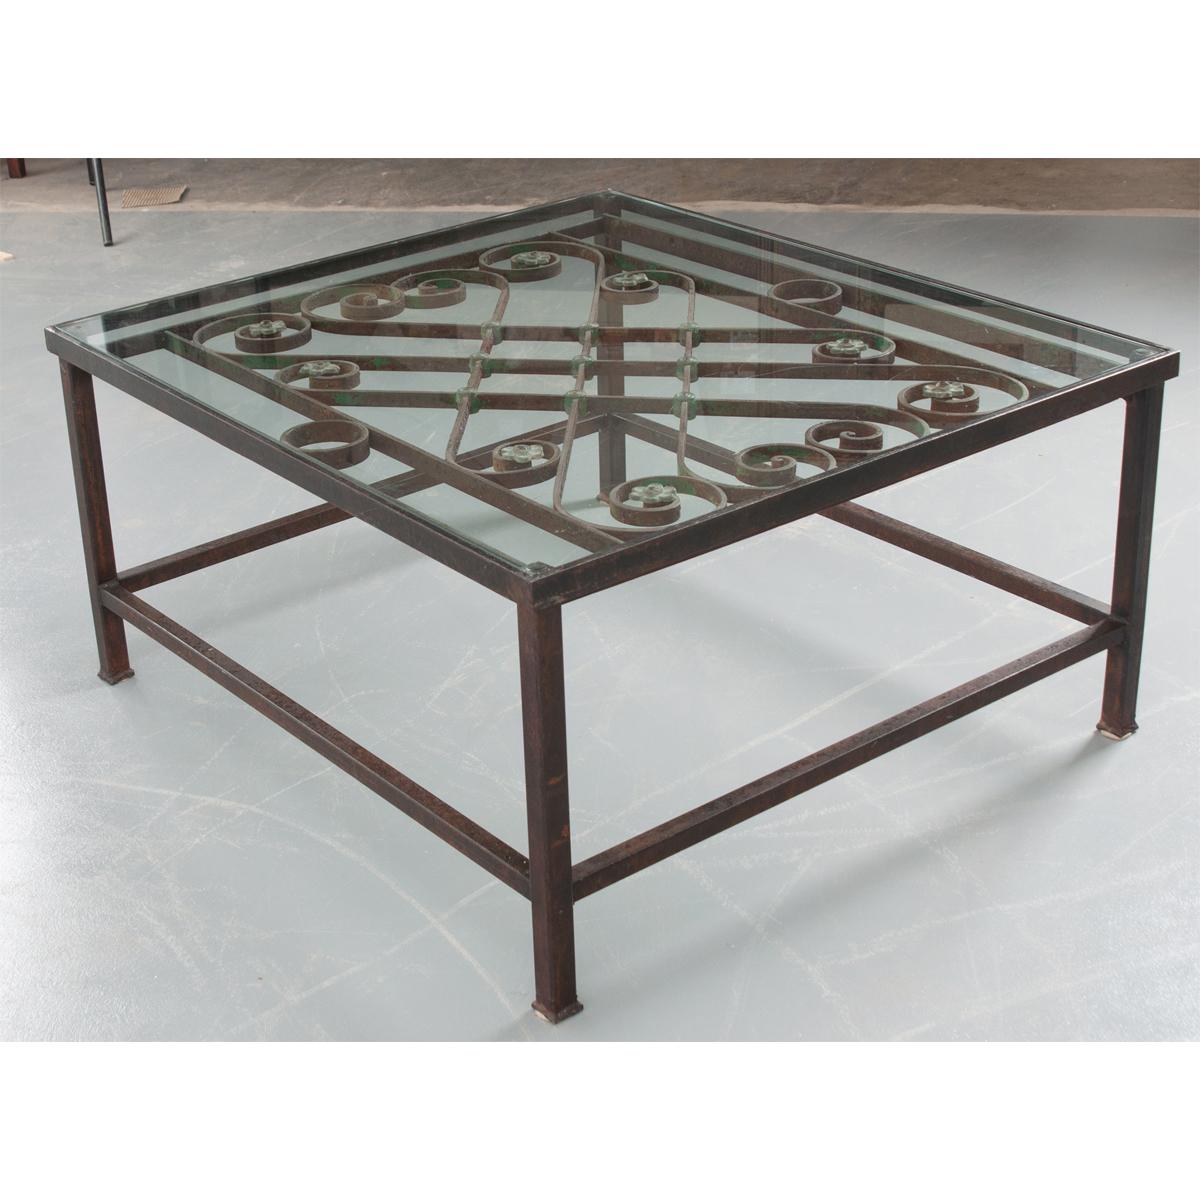 French Antique Iron Architectural Fragment and Glass Coffee Table In Good Condition For Sale In Baton Rouge, LA